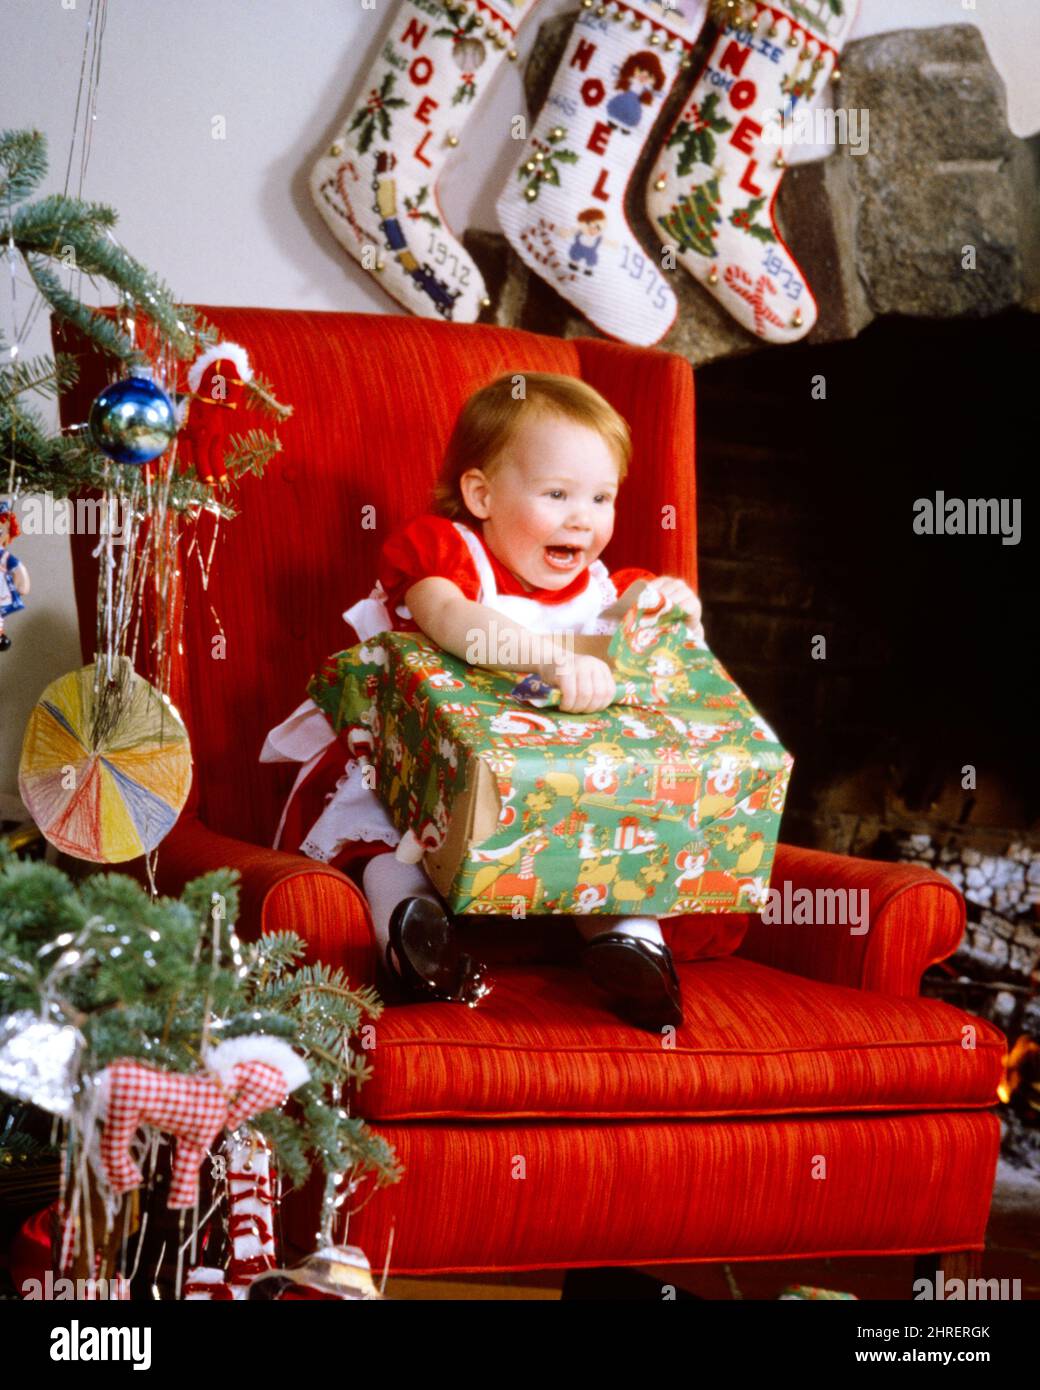 1970s 1980s HAPPY LAUGHING LITTLE GIRL TODDLER SITTING IN BIG RED LIVING ROOM CHAIR BY CHRISTMAS TREE UNWRAPPING A GIFT PRESENT - kx9470 PHT001 HARS LAUGH INFANT DECORATIONS PLEASED JOY LIFESTYLE SATISFACTION CELEBRATION FEMALES HOME LIFE COPY SPACE HALF-LENGTH HAPPINESS CHEERFUL DISCOVERY LIVING ROOM MERRY EXCITEMENT BY IN HOLIDAYS SMILES DECEMBER DECEMBER 25 JOYFUL UNWRAPPING JOYOUS JUVENILES BABY GIRL CAUCASIAN ETHNICITY OLD FASHIONED Stock Photo